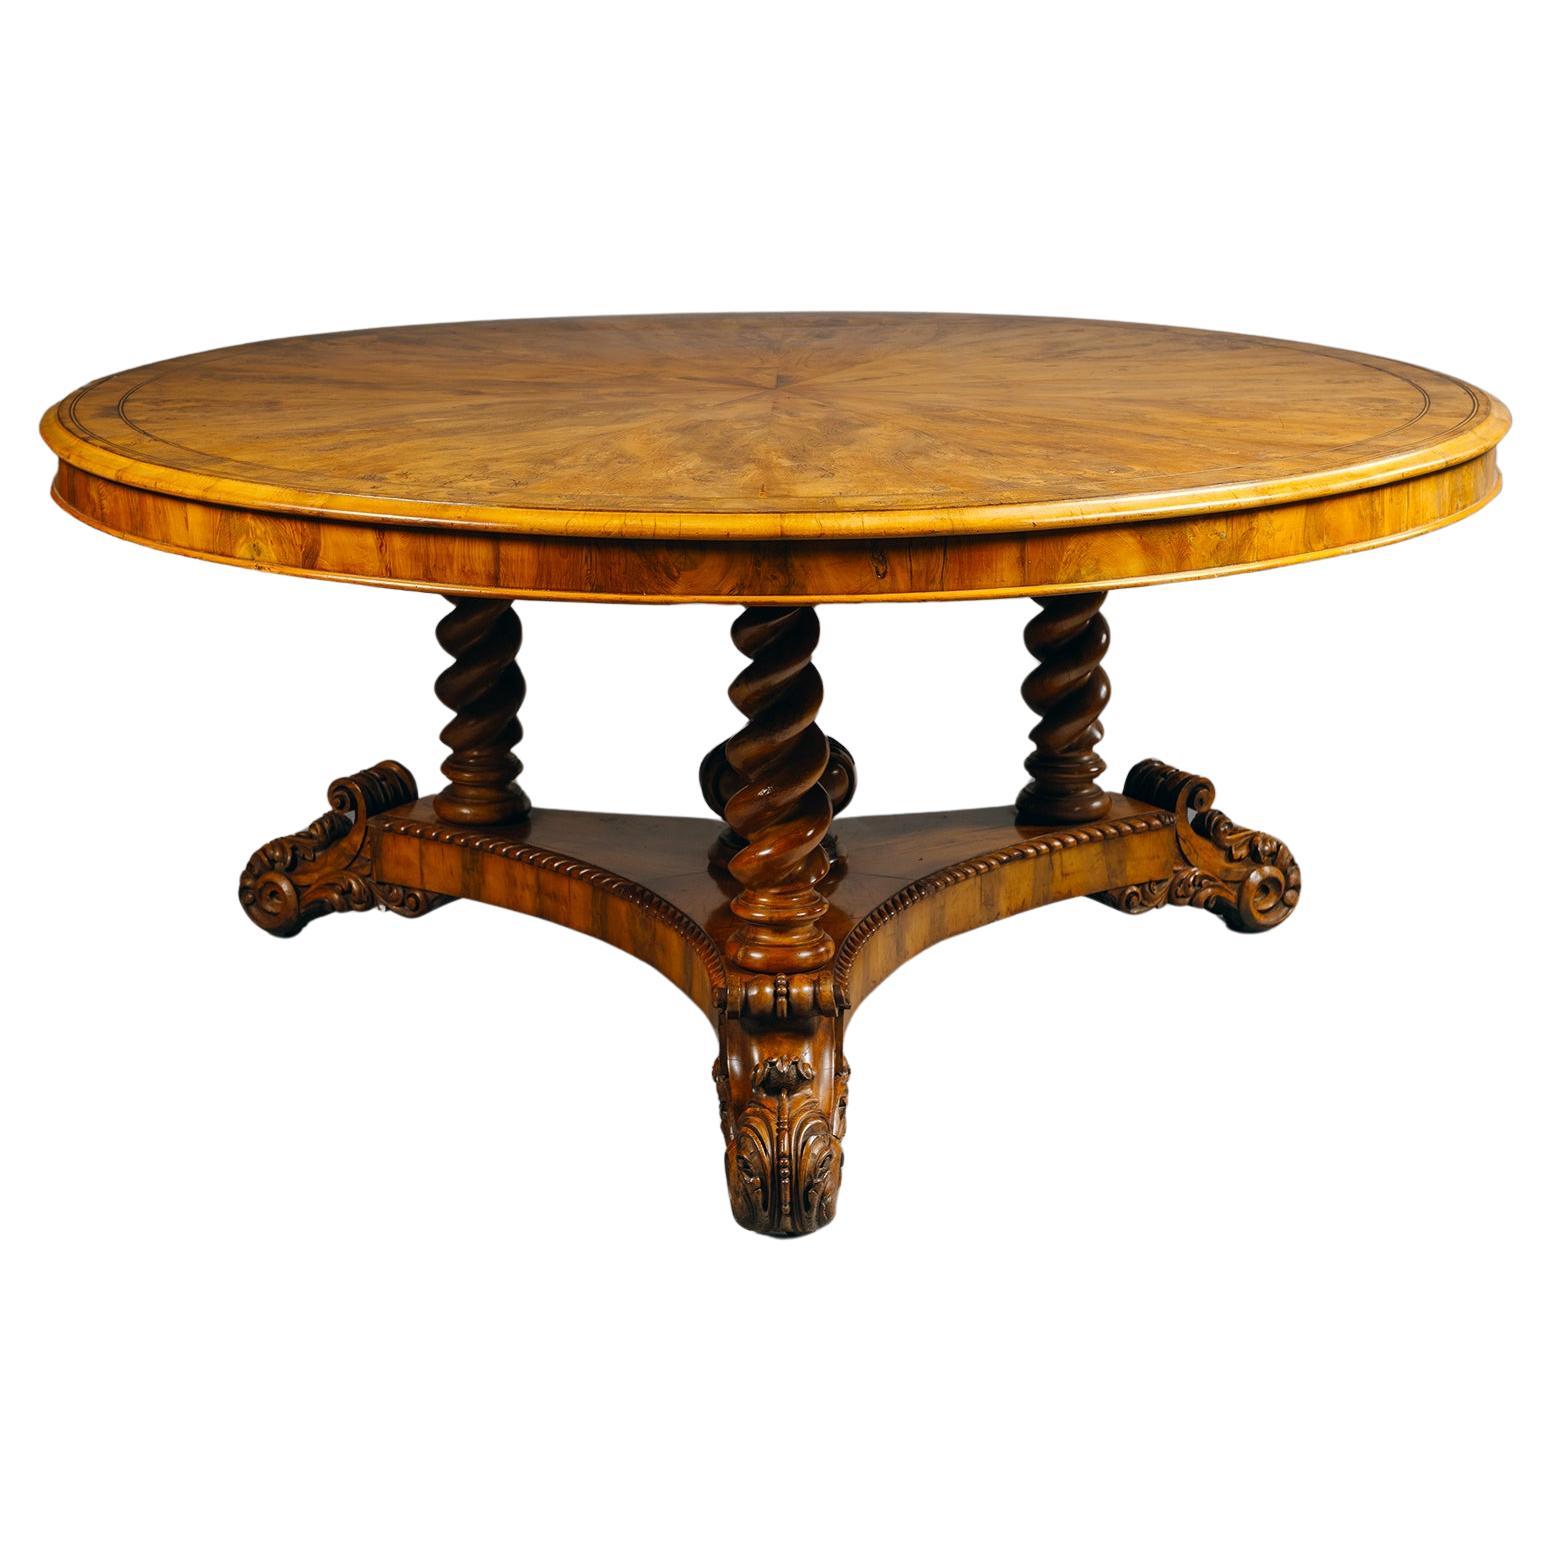 A Large William IV Yew Wood Centre Table For Sale